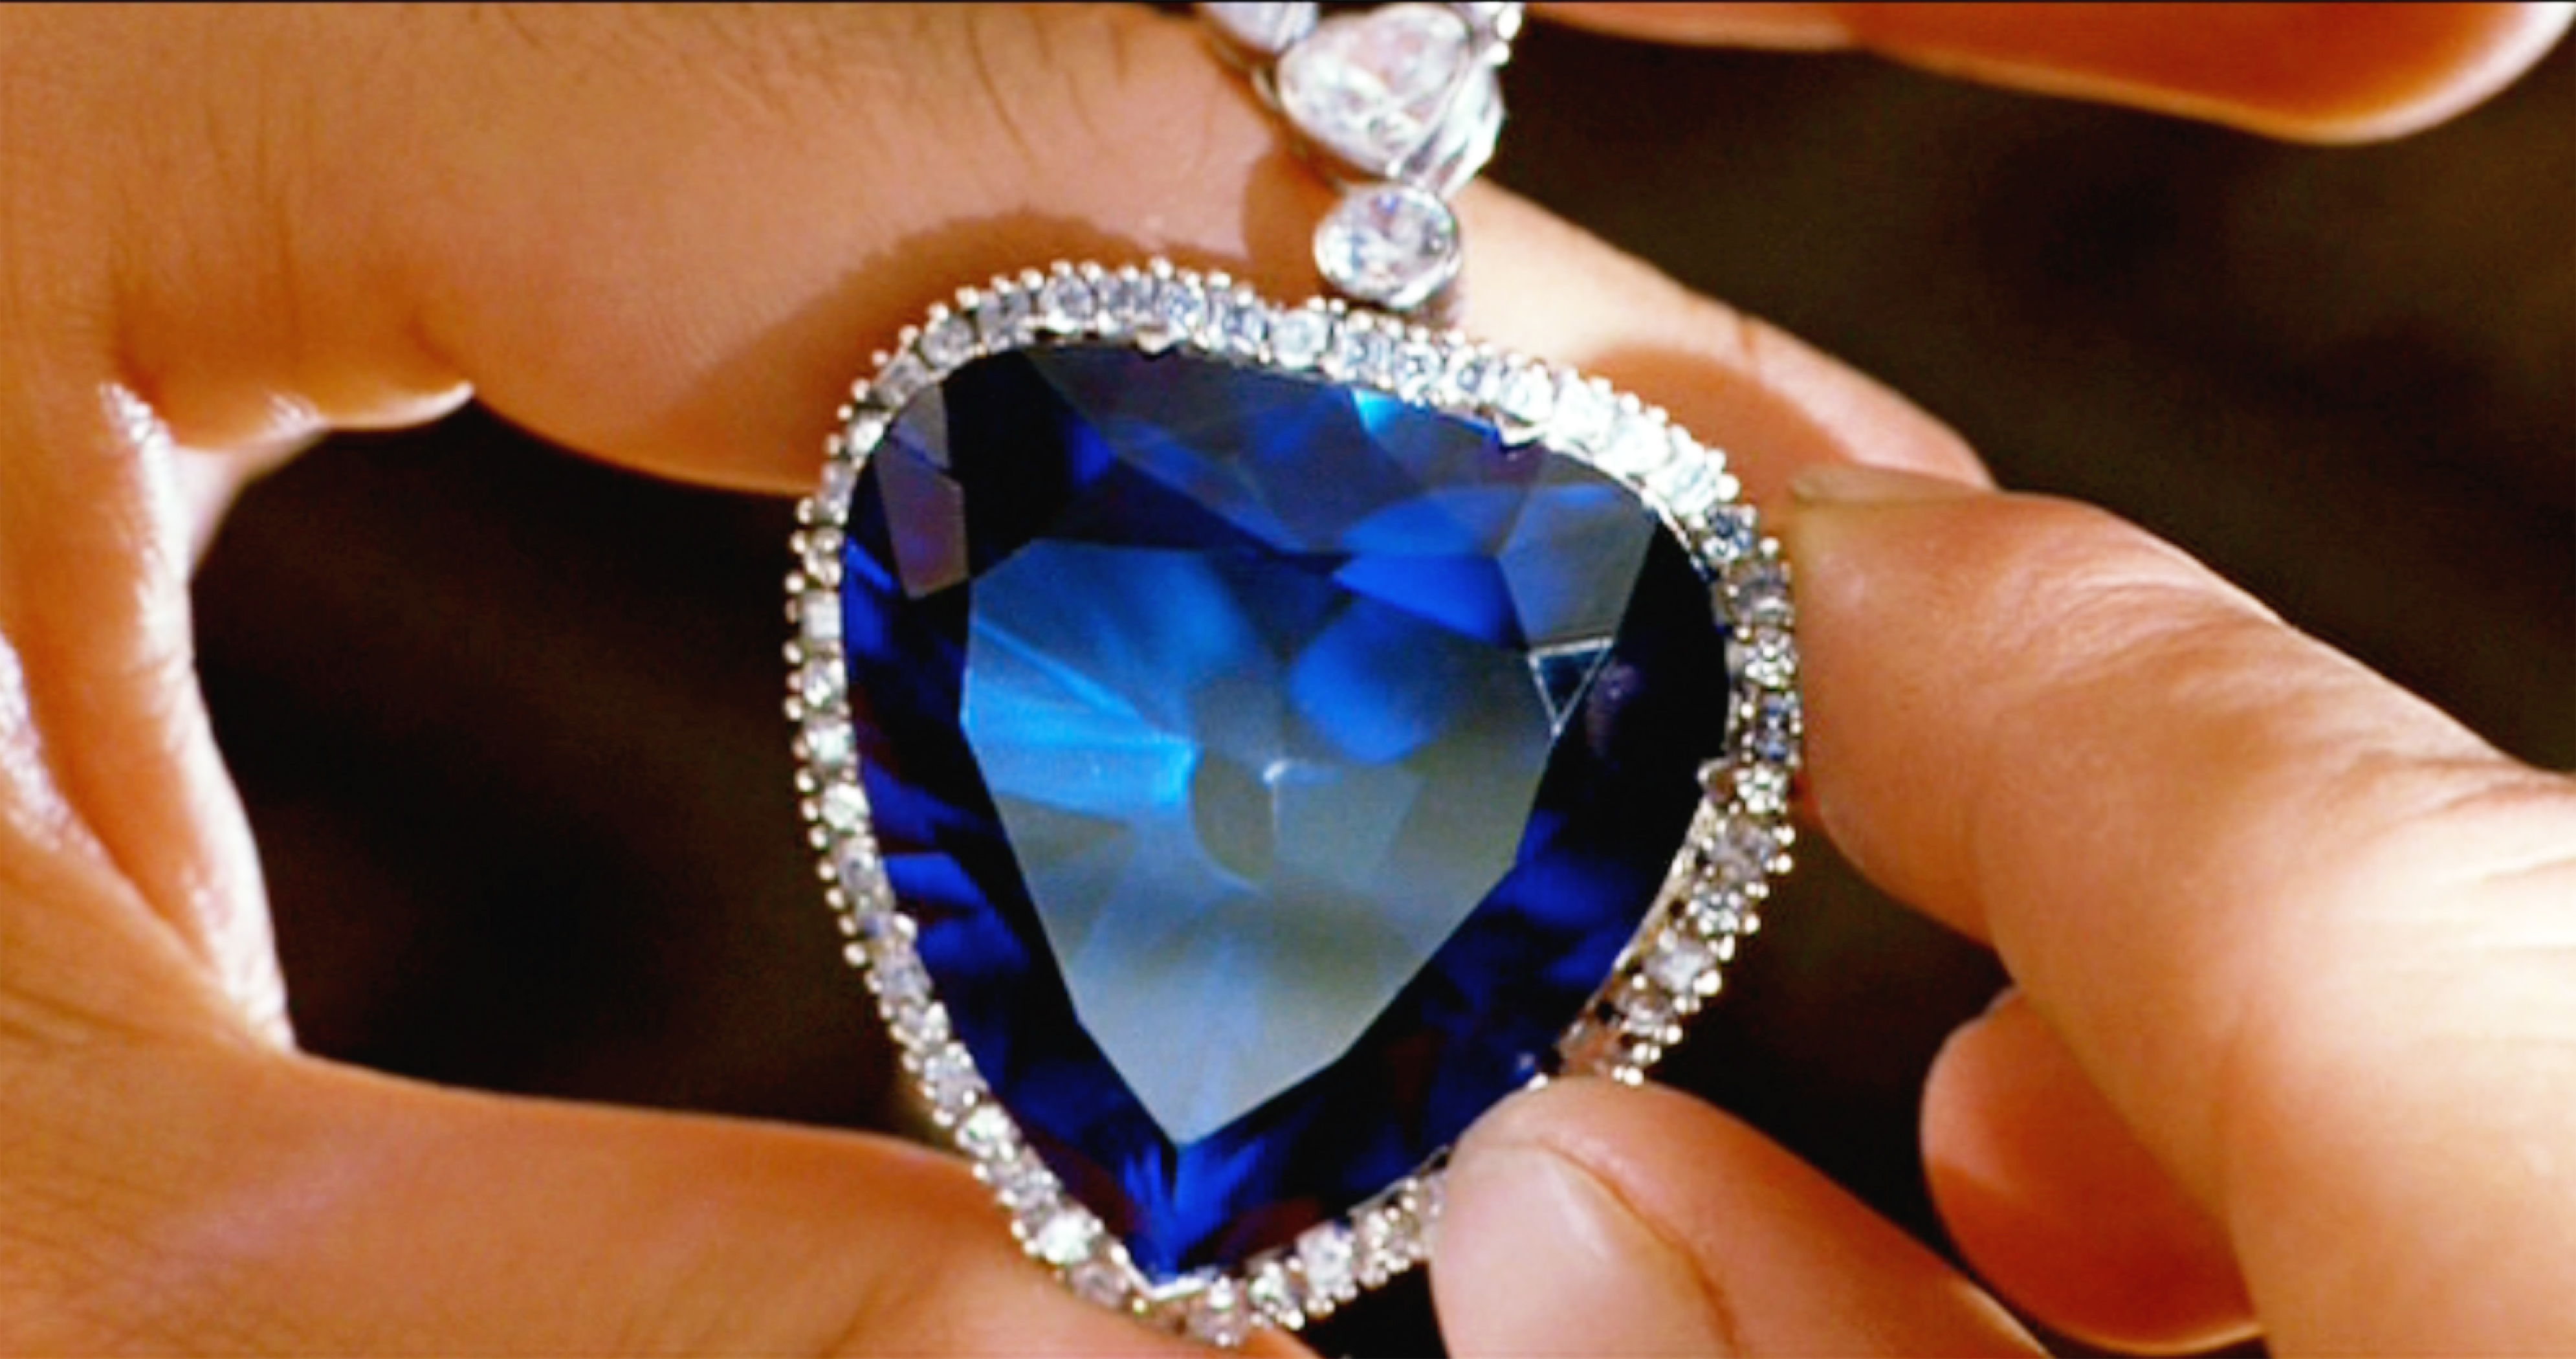 See the Heart of the Ocean blue diamond necklace, plus more of the most  expensive jewelry worn by your favorite stars | Gallery 